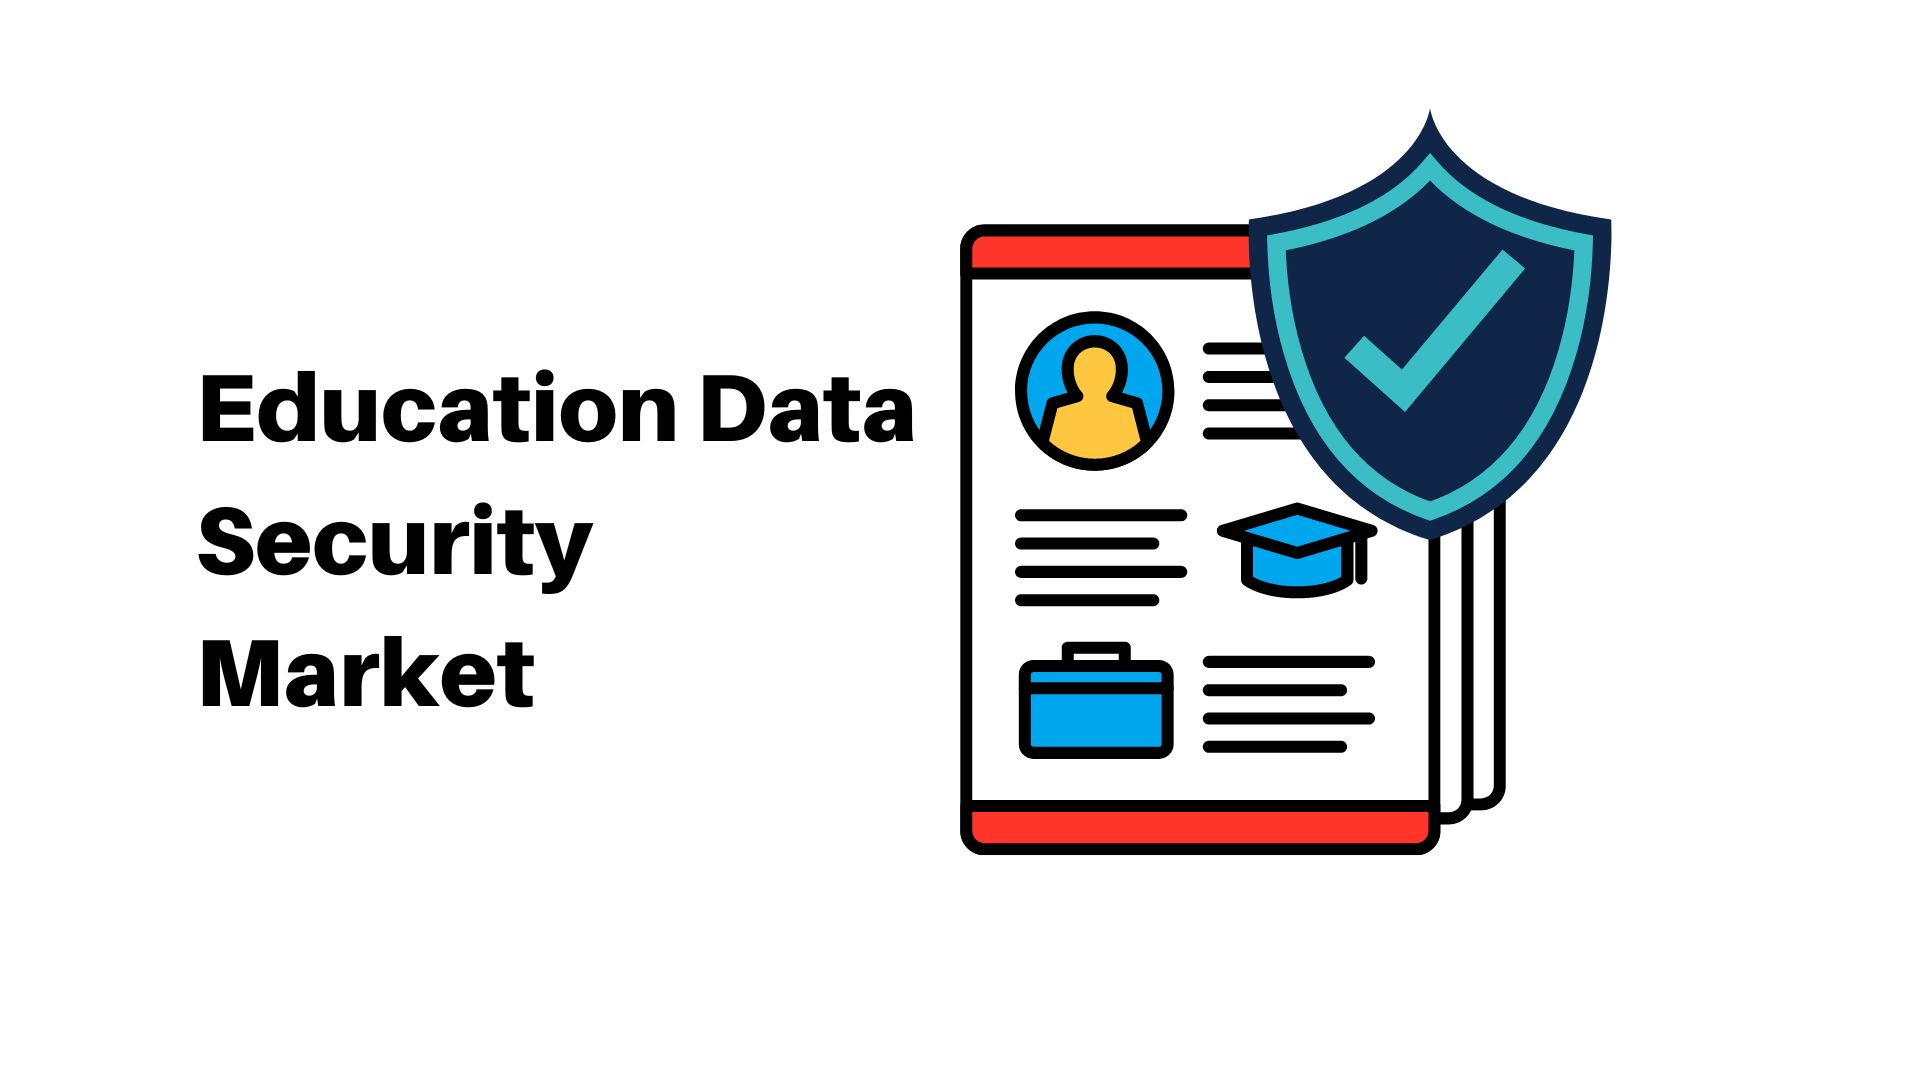 Education Data Security Market is expected to be valued around USD 84.79 billion by 2033